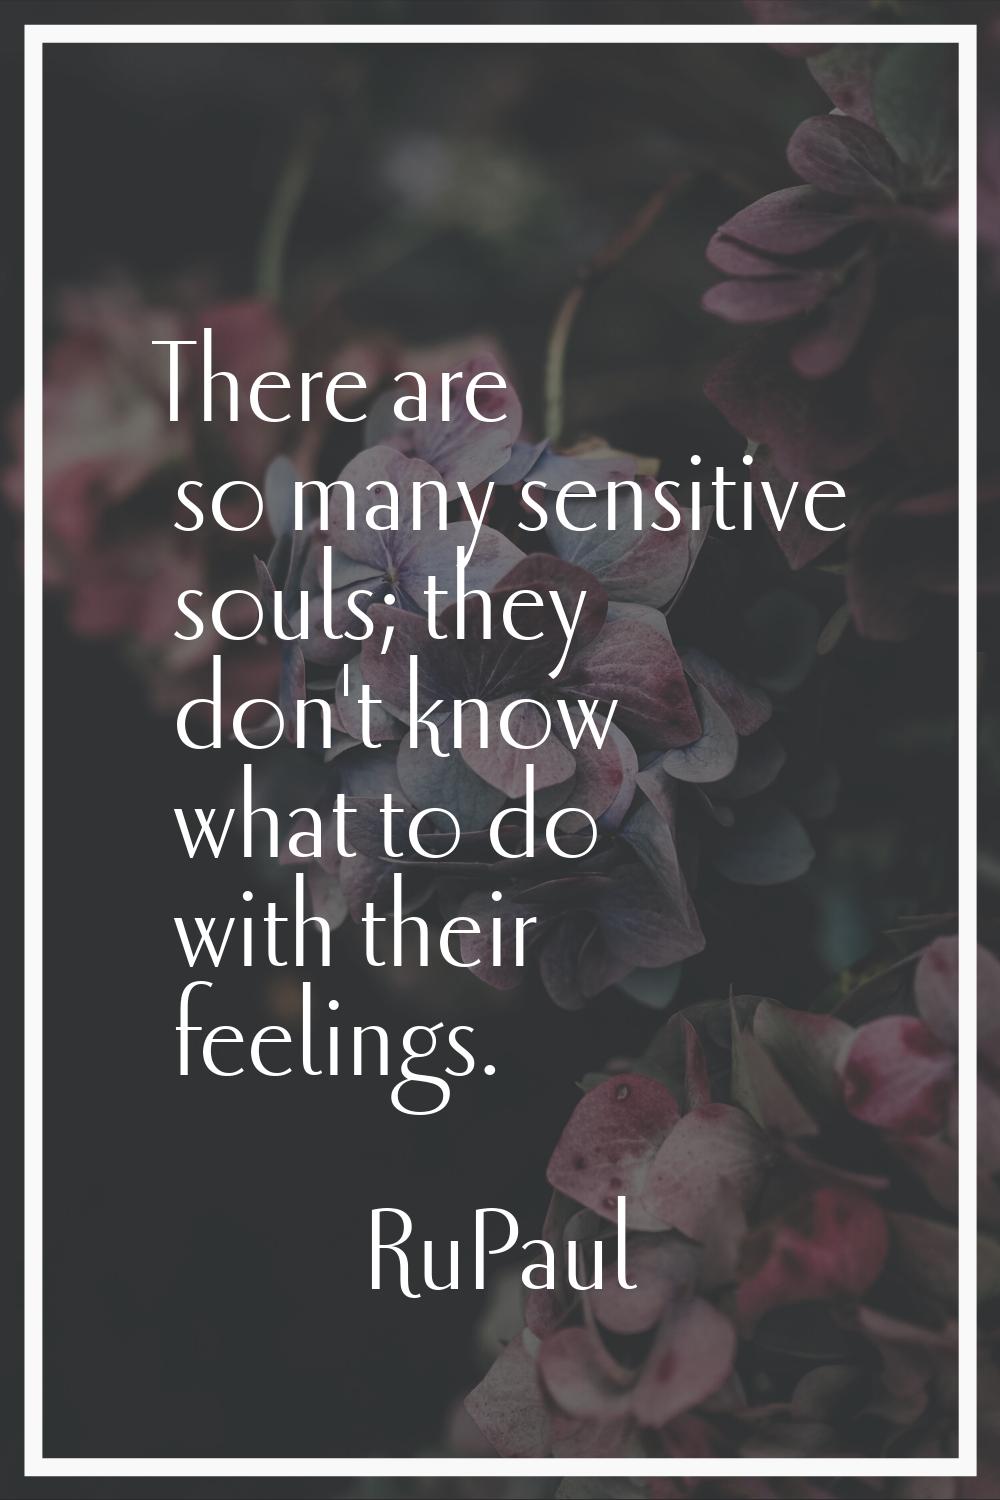 There are so many sensitive souls; they don't know what to do with their feelings.